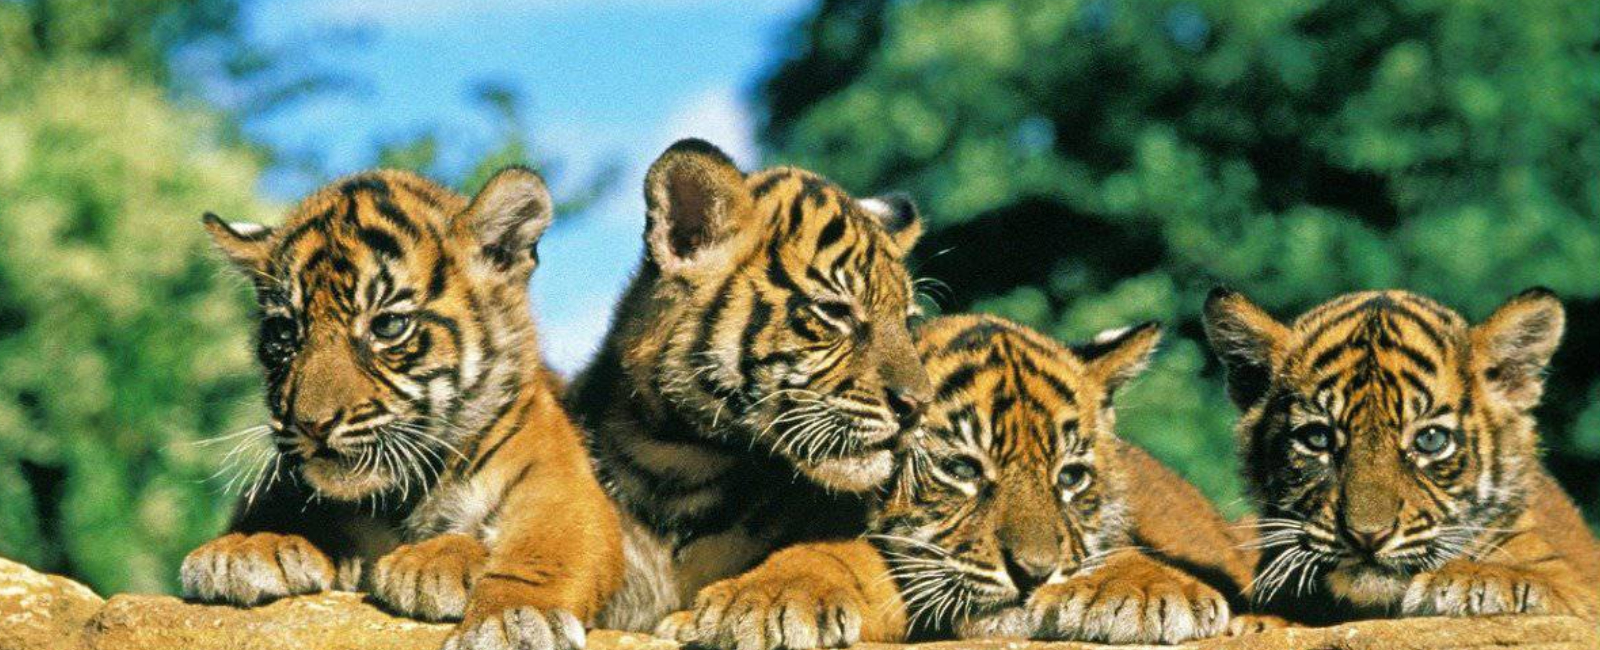 Wildlife Of Incredible India With Tiger